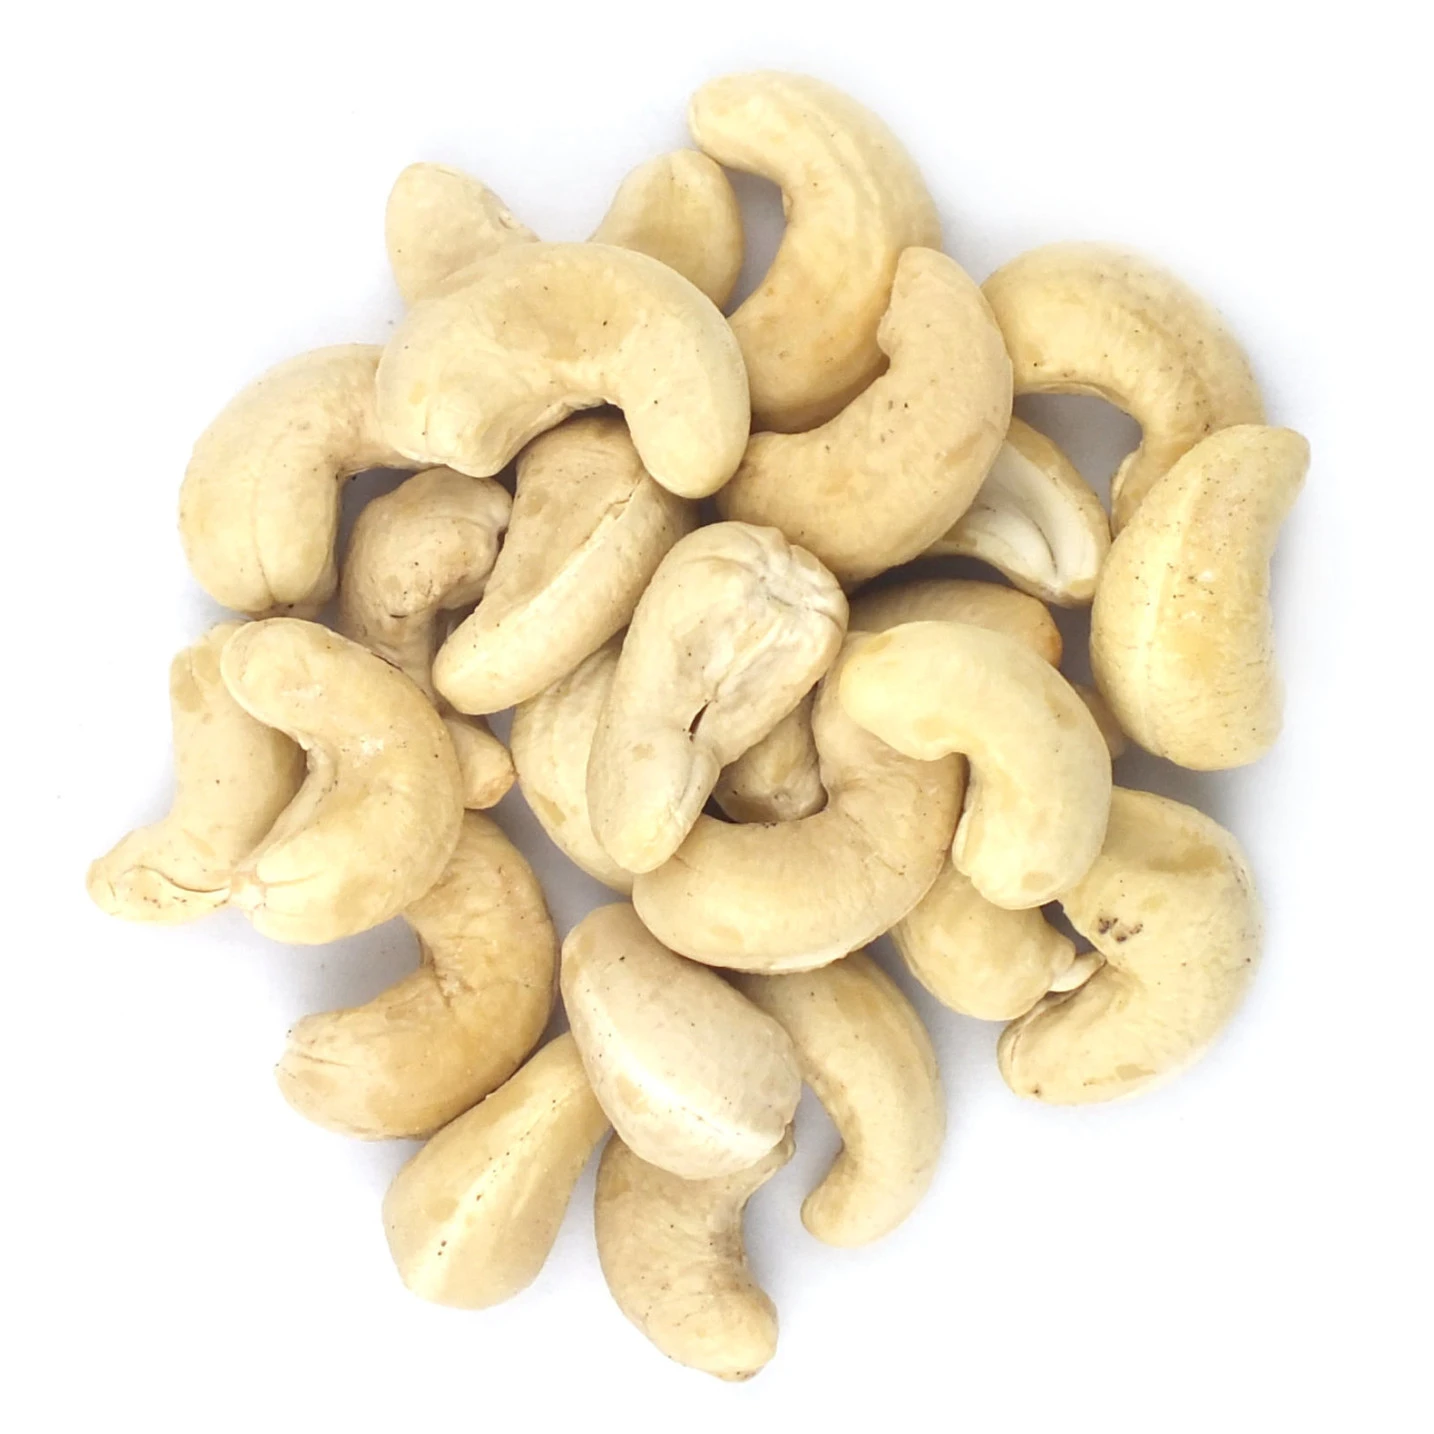 Manufacture Products Roasted Salted Vietnam Export Products Cashew Kernel Nuts